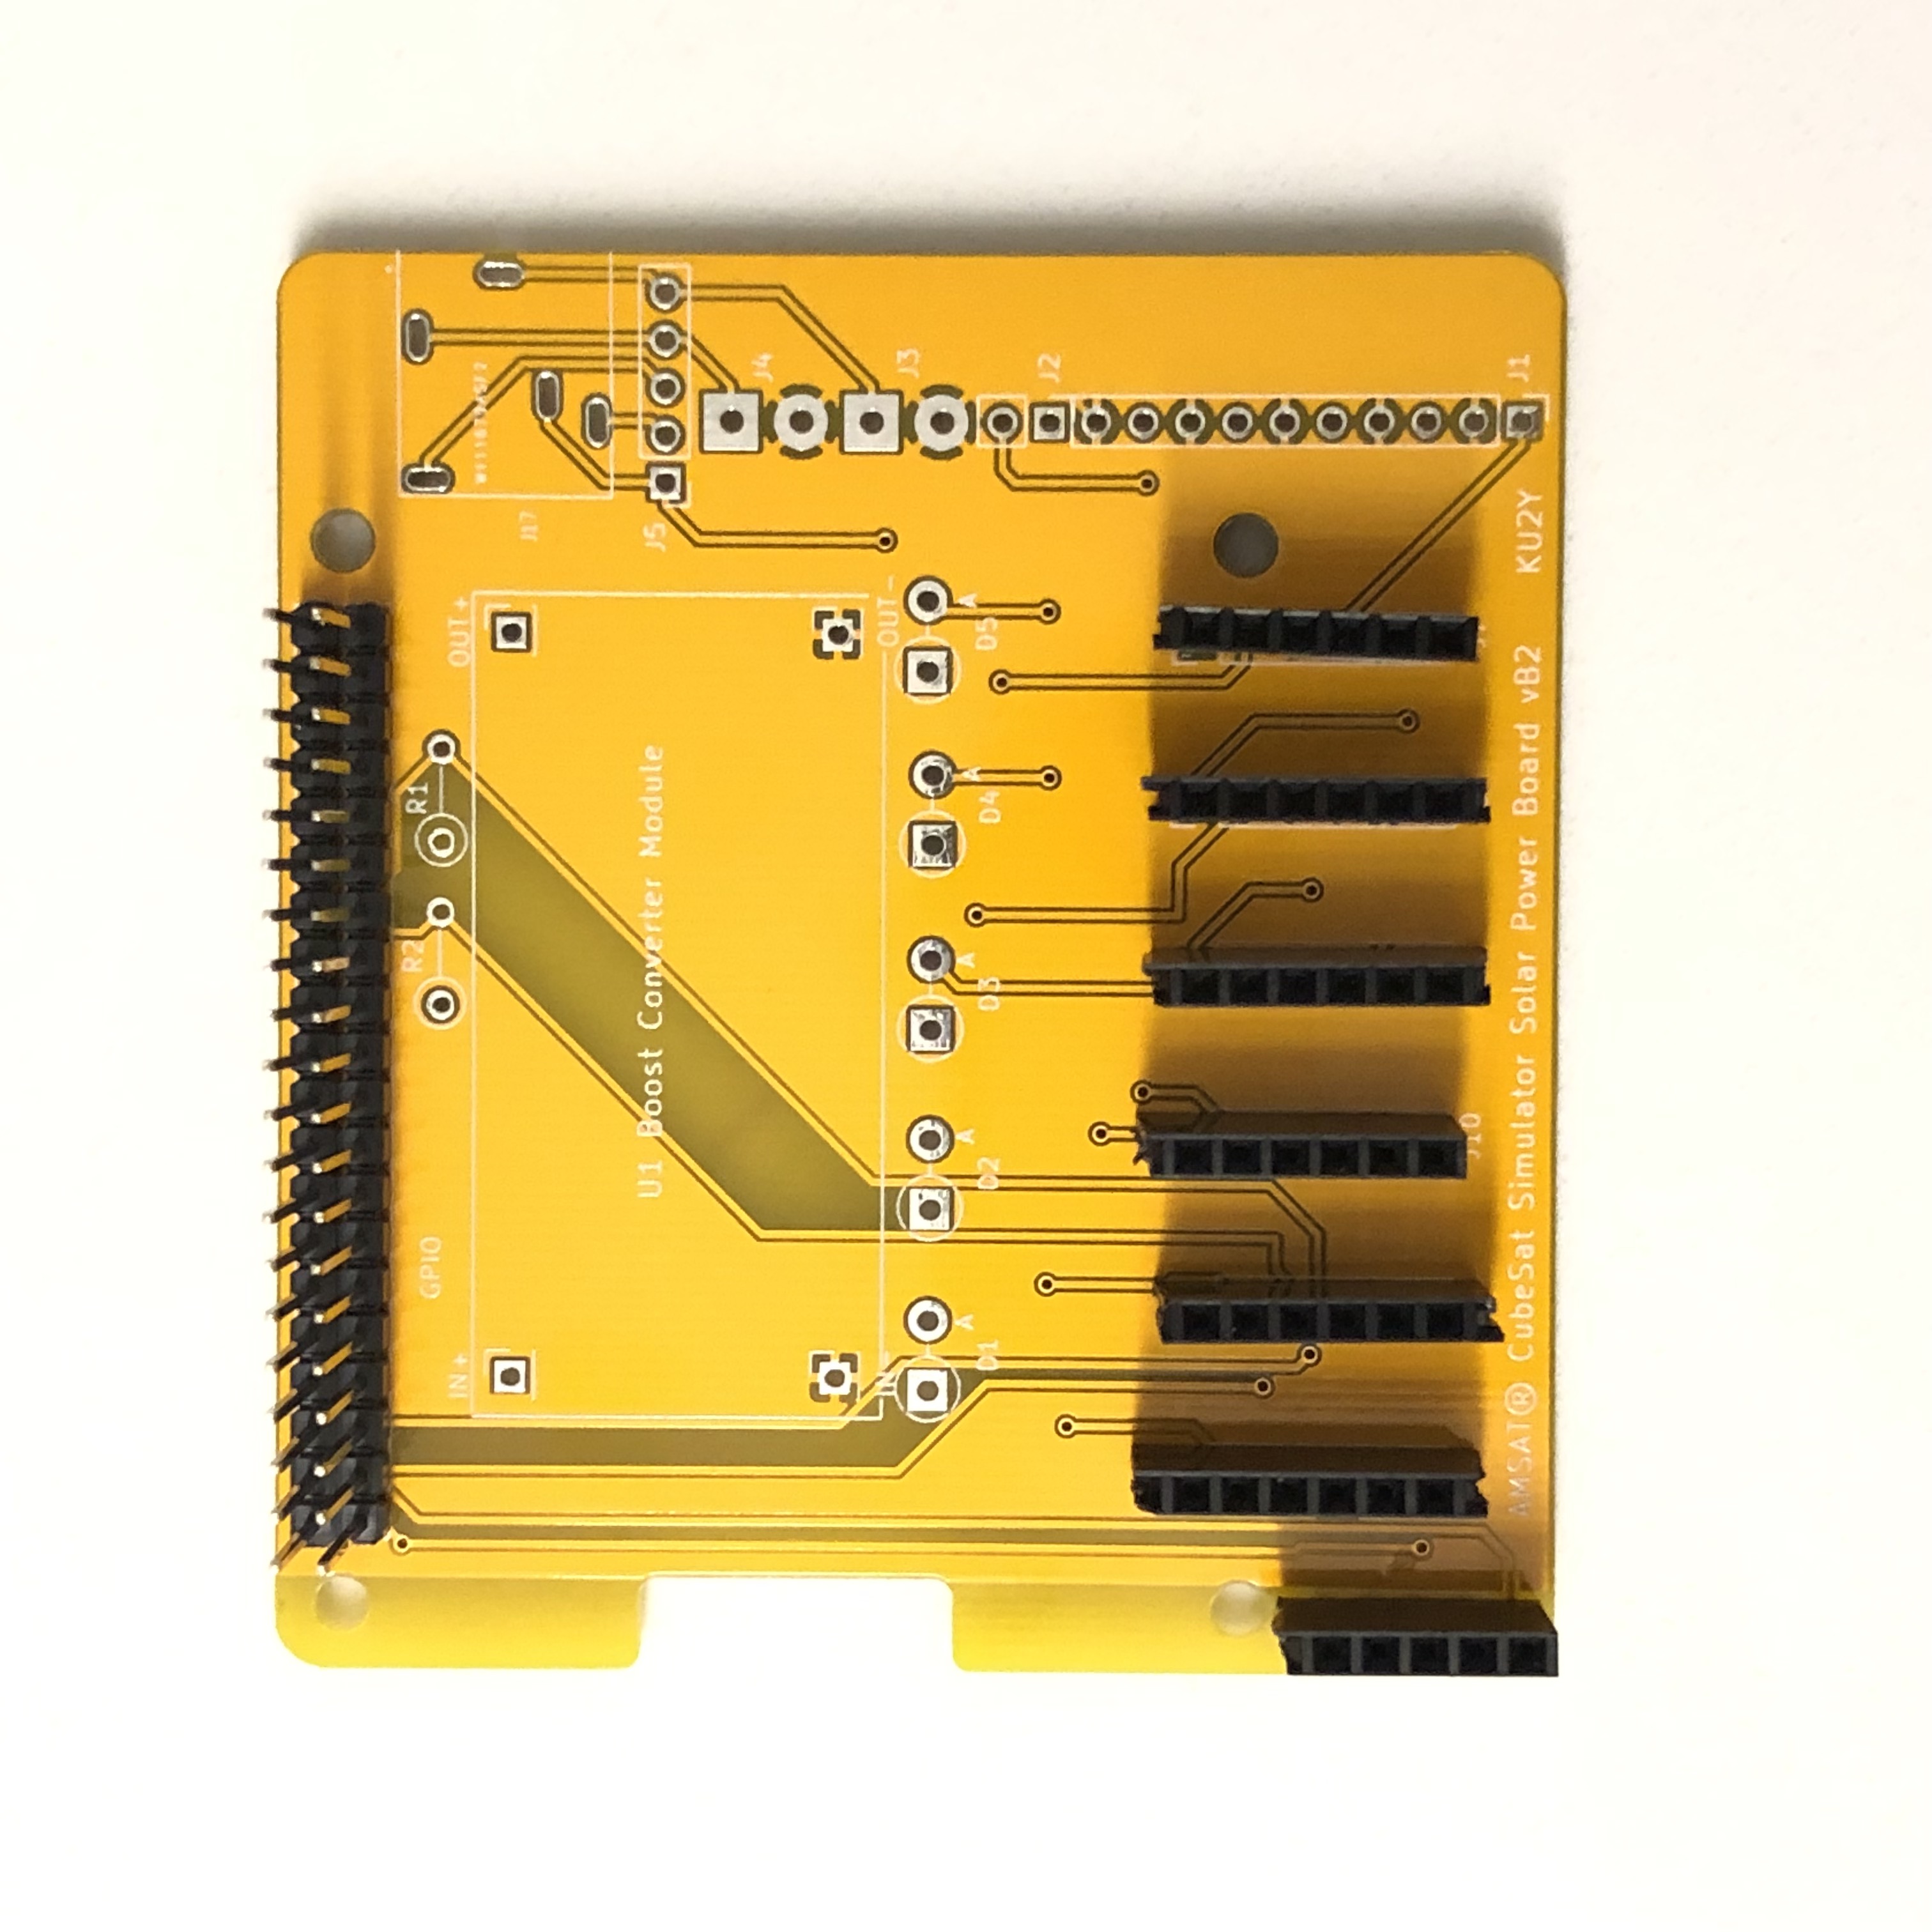 PCB with J1 - J5 installed